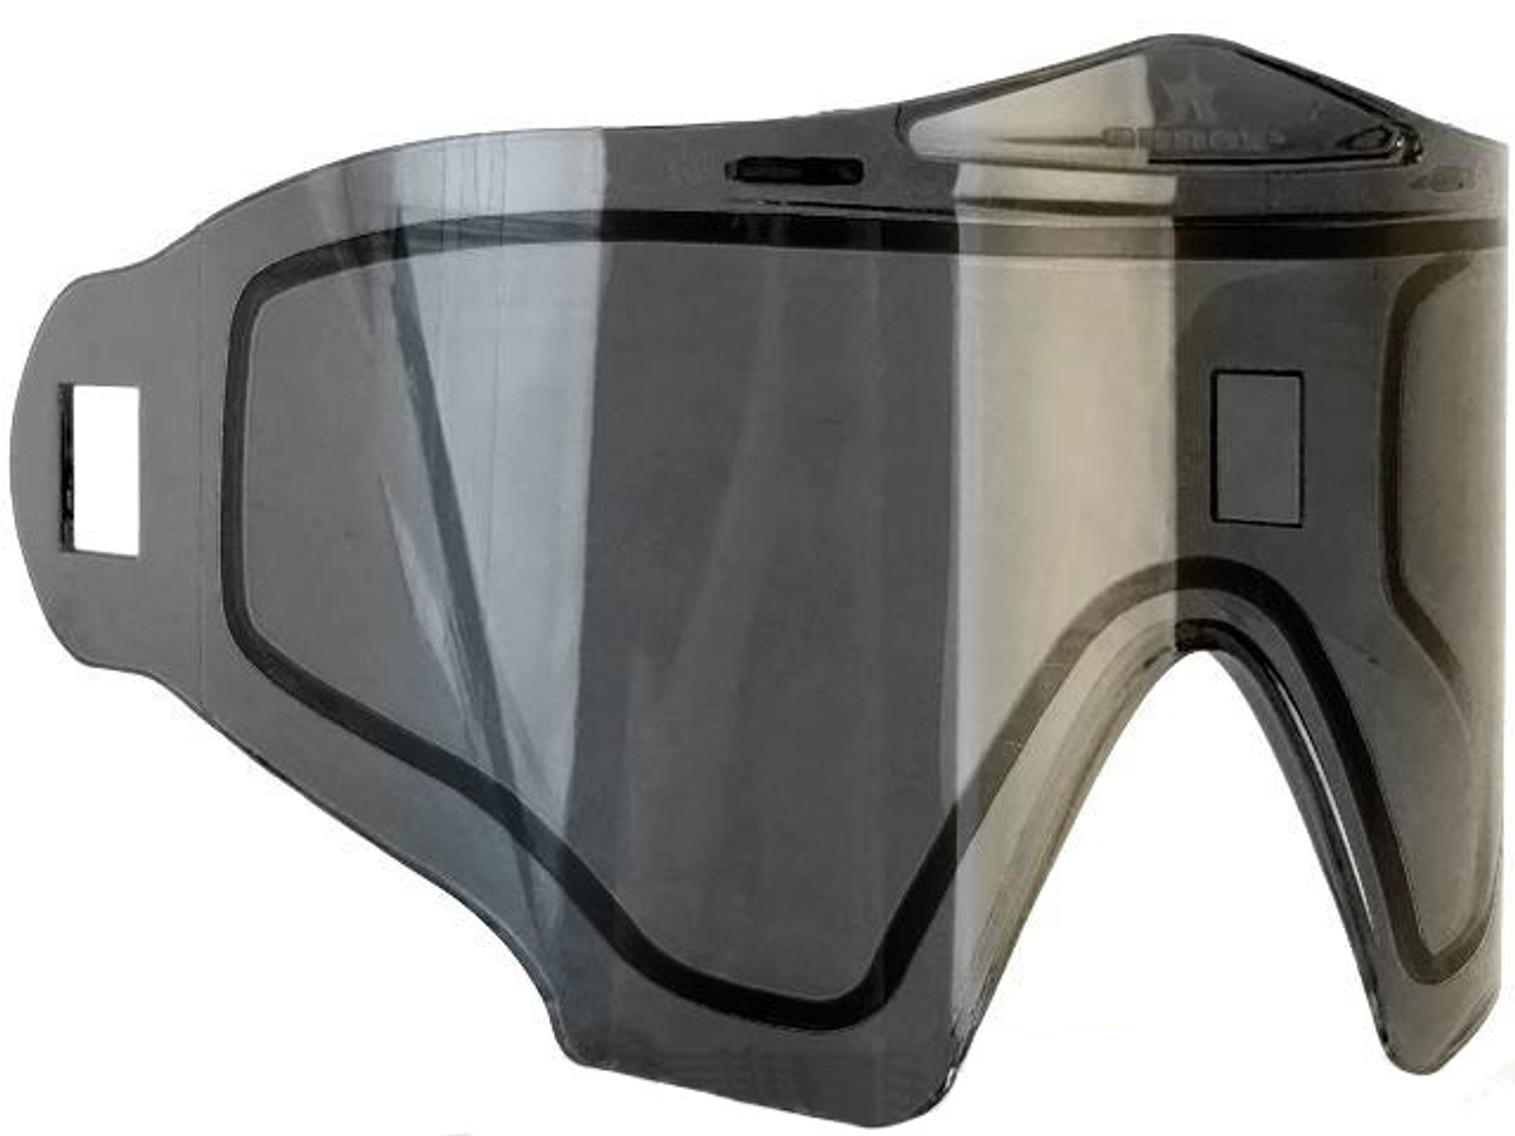 Annex Thermal Lens for Airsoft Paintball Full Face Masks (ANSI Rated) by Valken (Color: Smoke / Mirror)